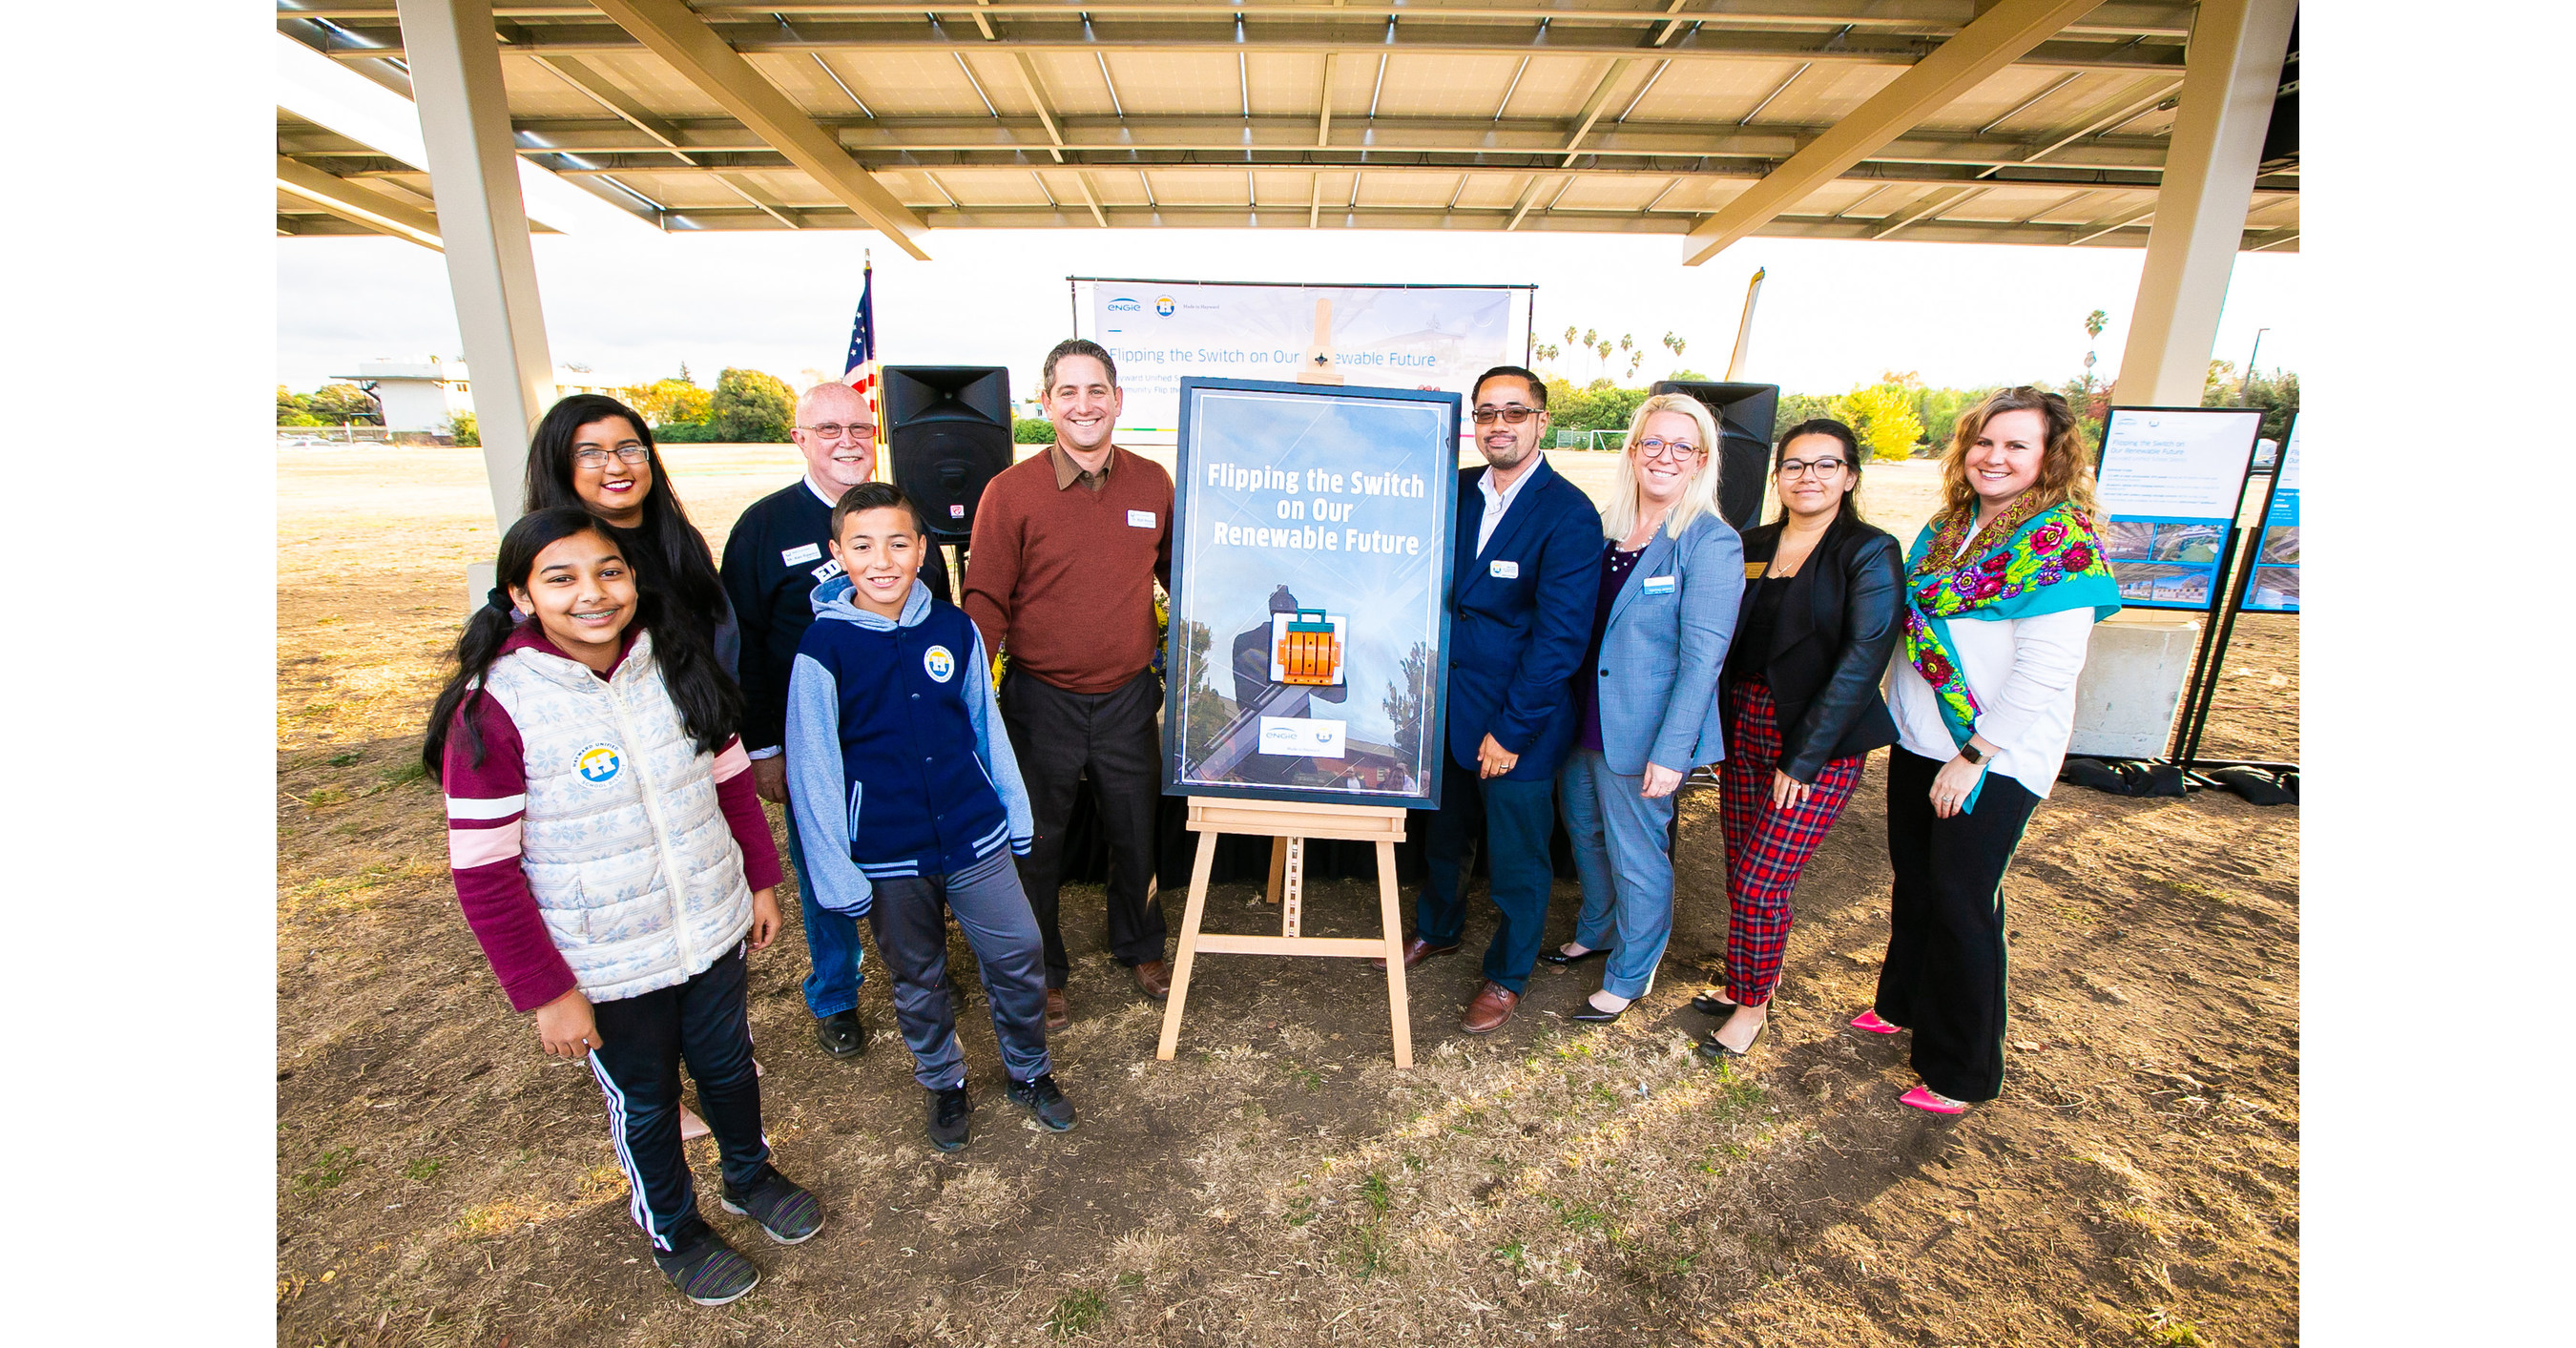 Hayward Unified School District Launches Sustainable Energy Program